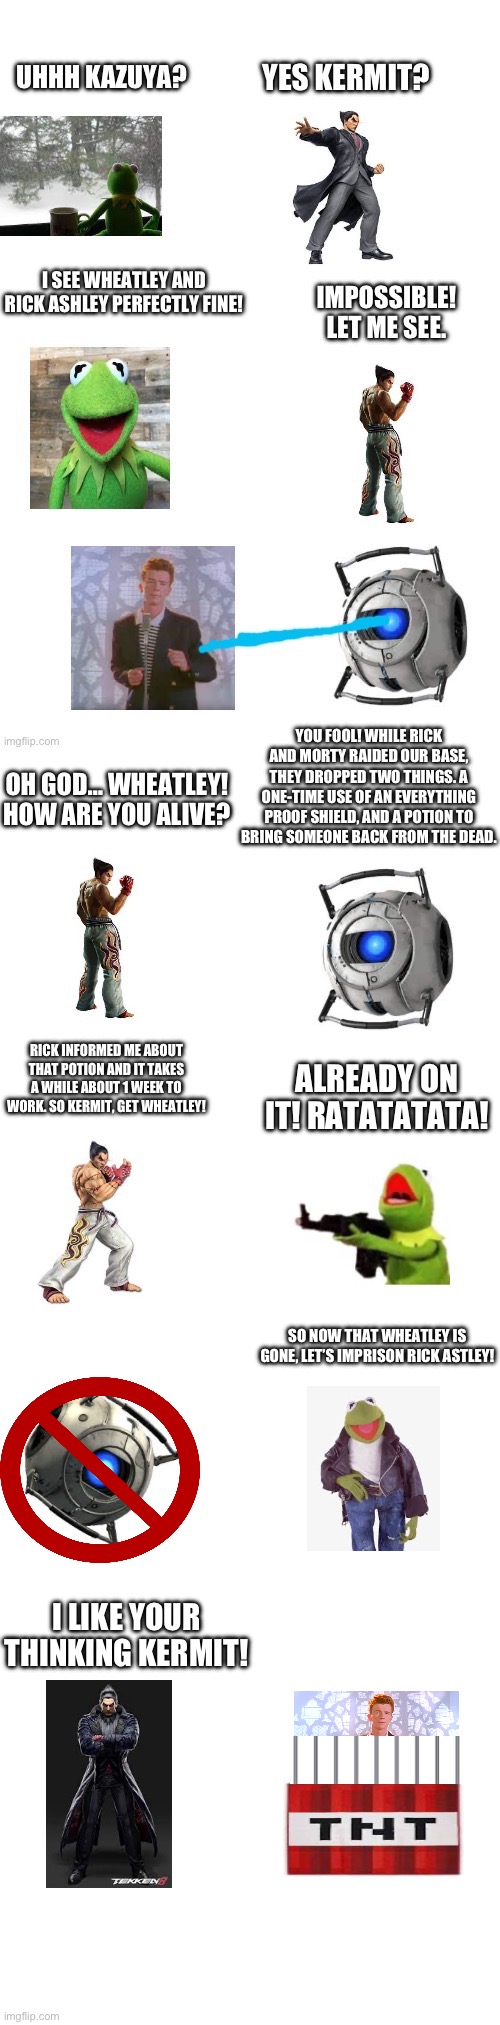 Did my first lil strip of the story | SO NOW THAT WHEATLEY IS GONE, LET’S IMPRISON RICK ASTLEY! I LIKE YOUR THINKING KERMIT! | image tagged in kermit the frog,kazuya,rick astley,funny,memes,relatable | made w/ Imgflip meme maker